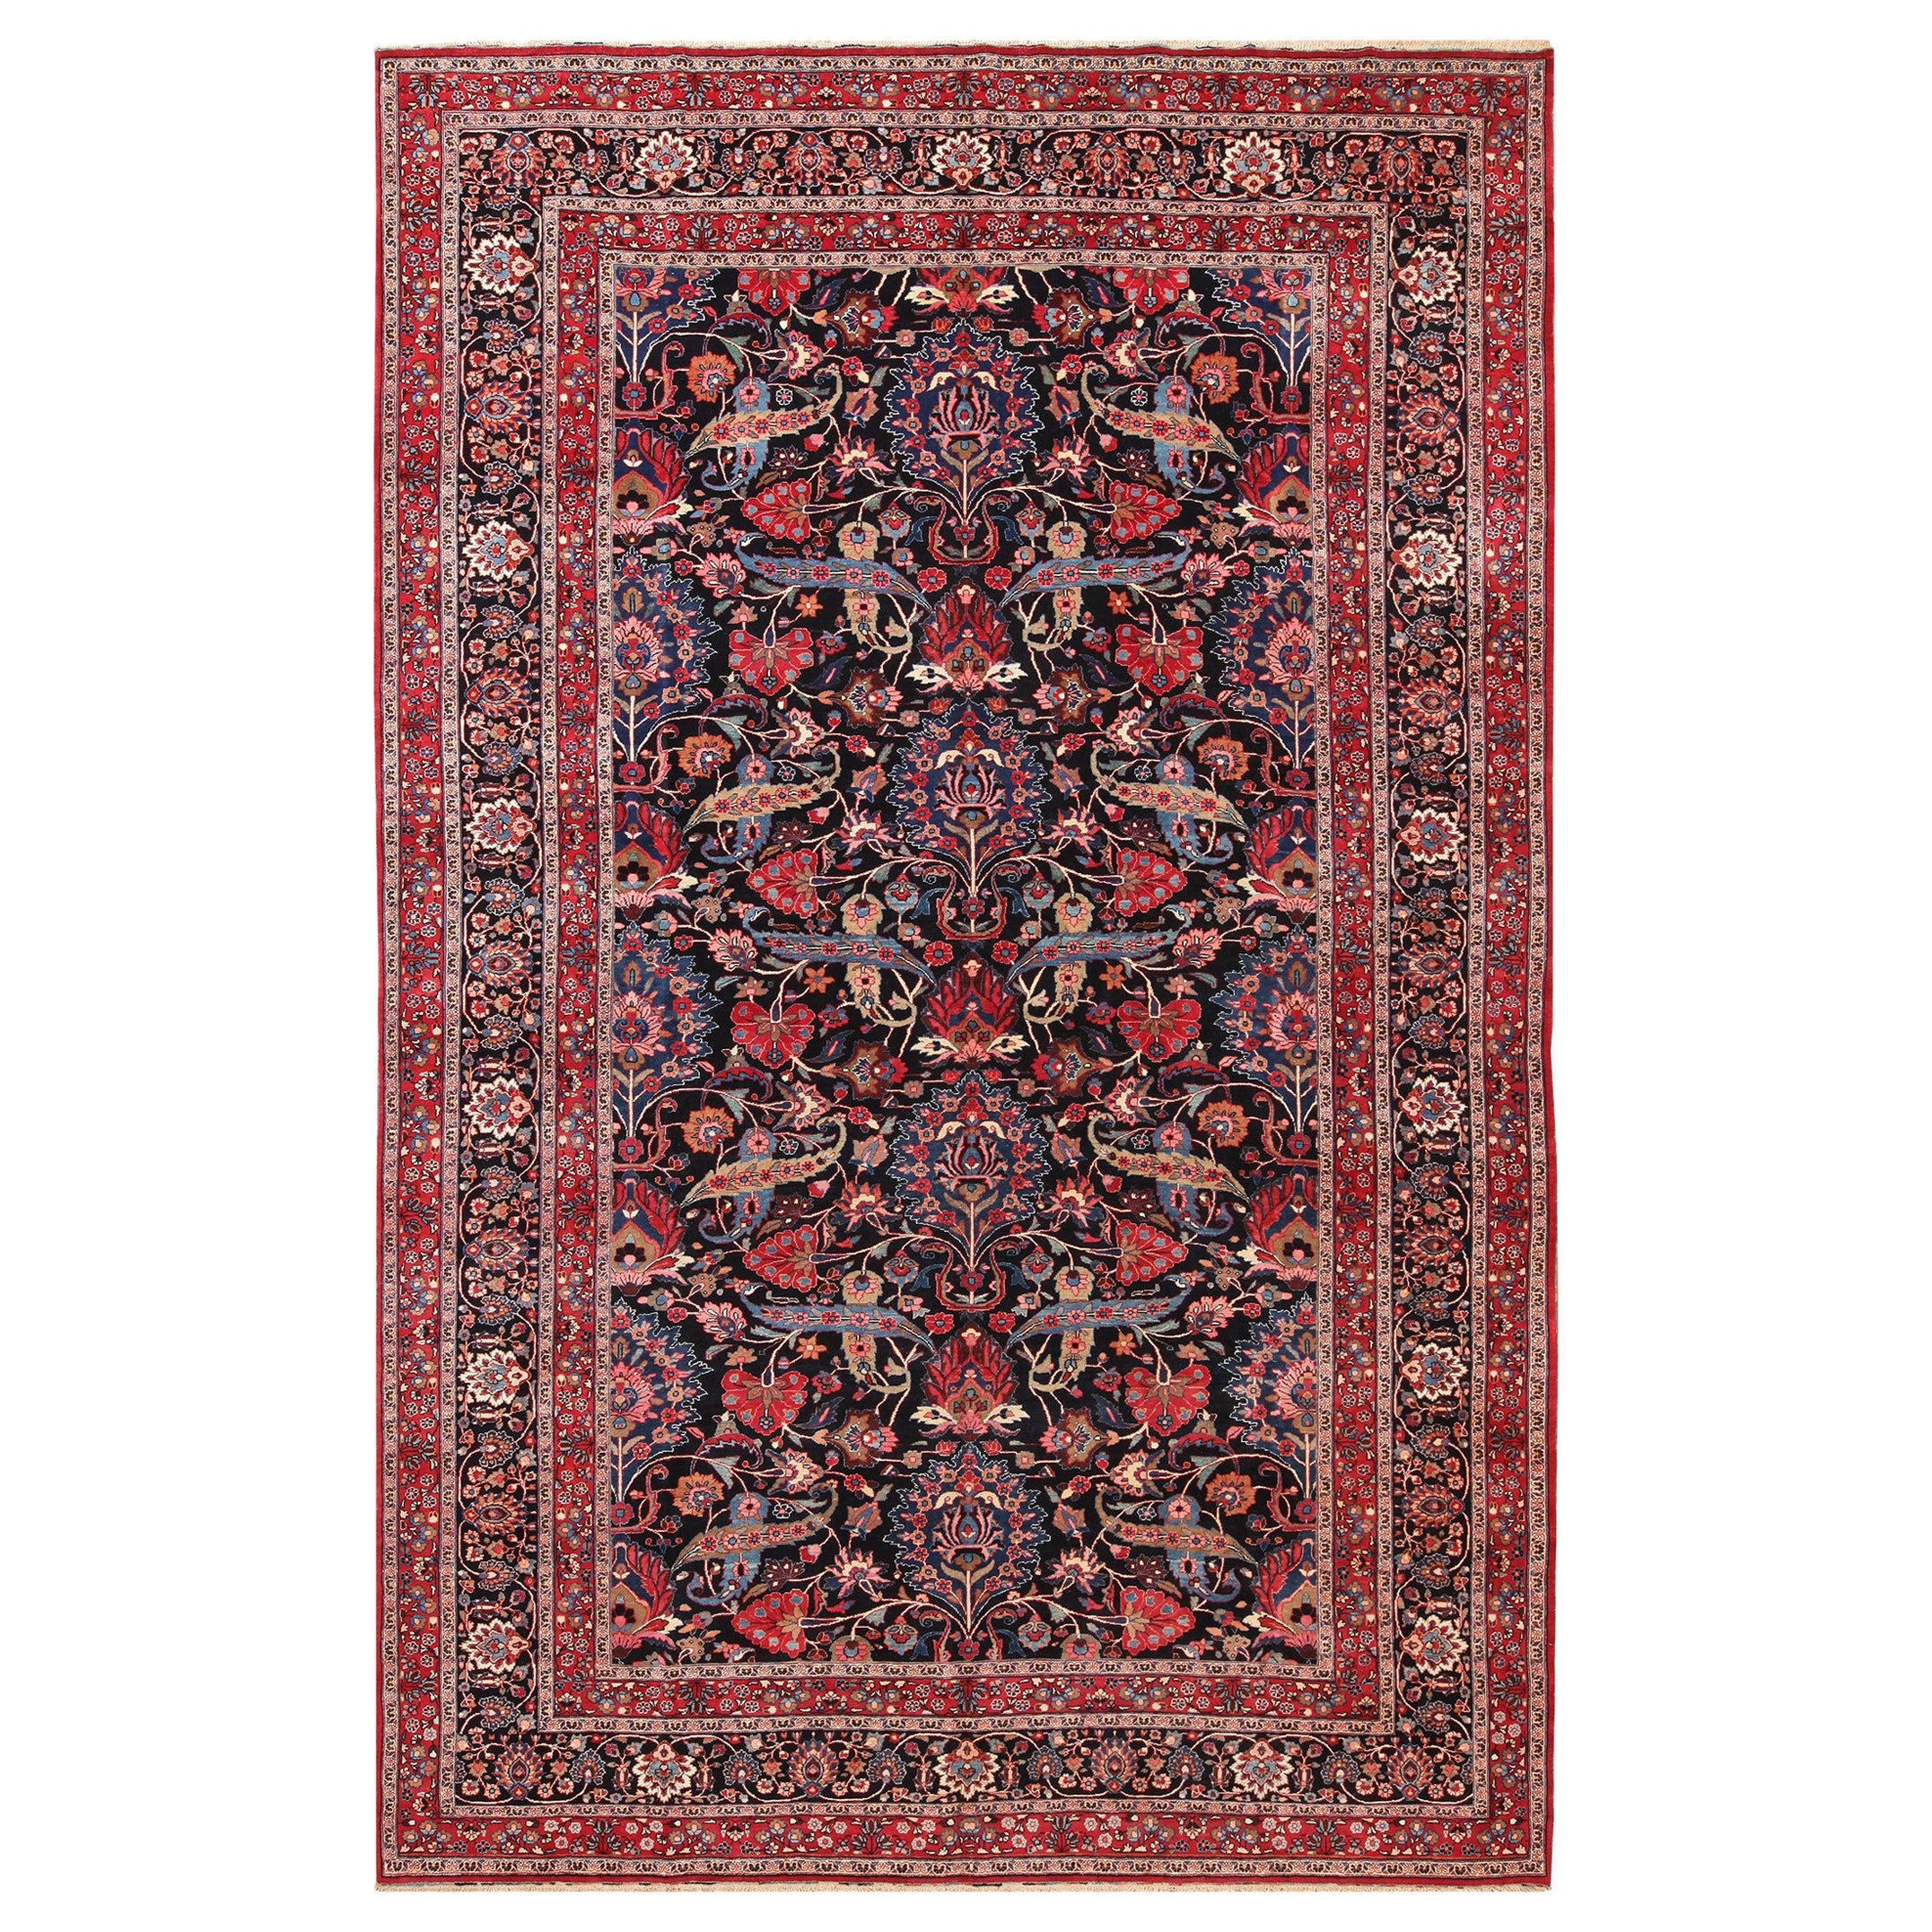 Unusually Fine Floral Persian Large Scale Antique Khorassan Rug 10'2" x 16' For Sale